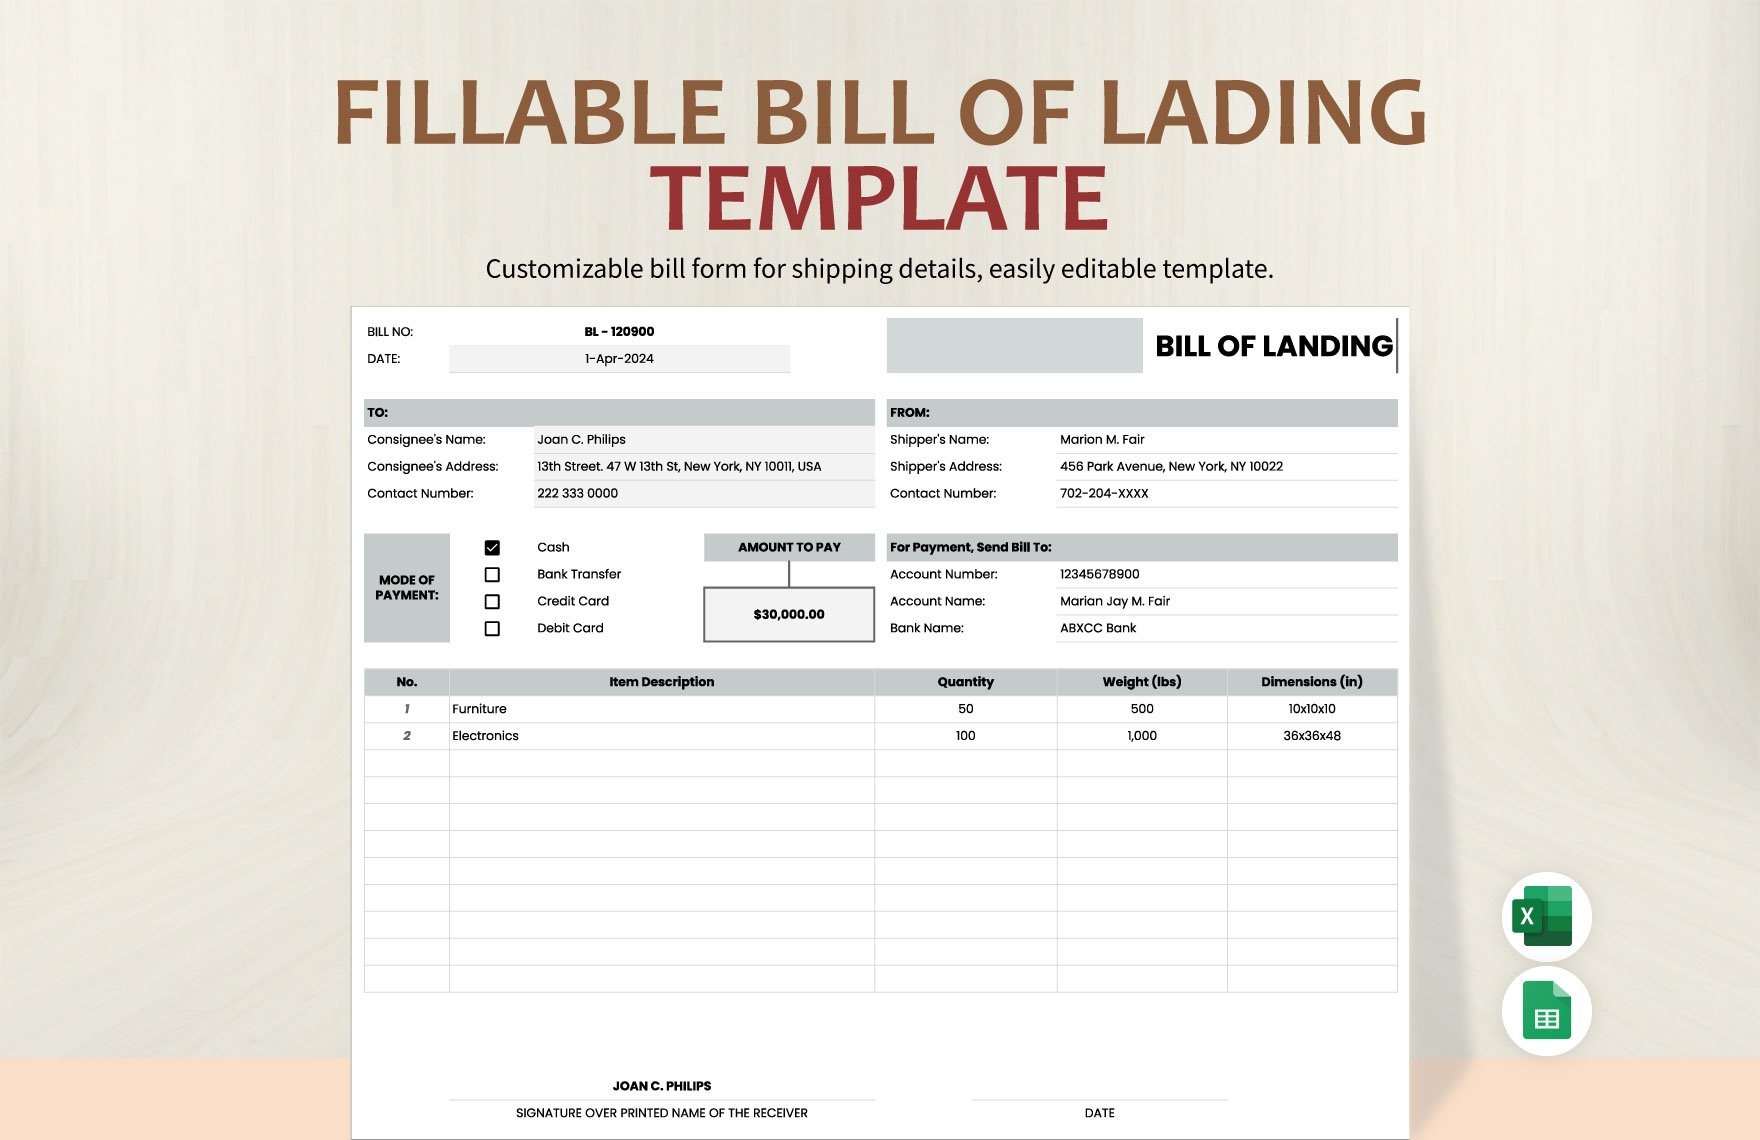 Fillable Bill of Lading Template in Excel, Google Sheets